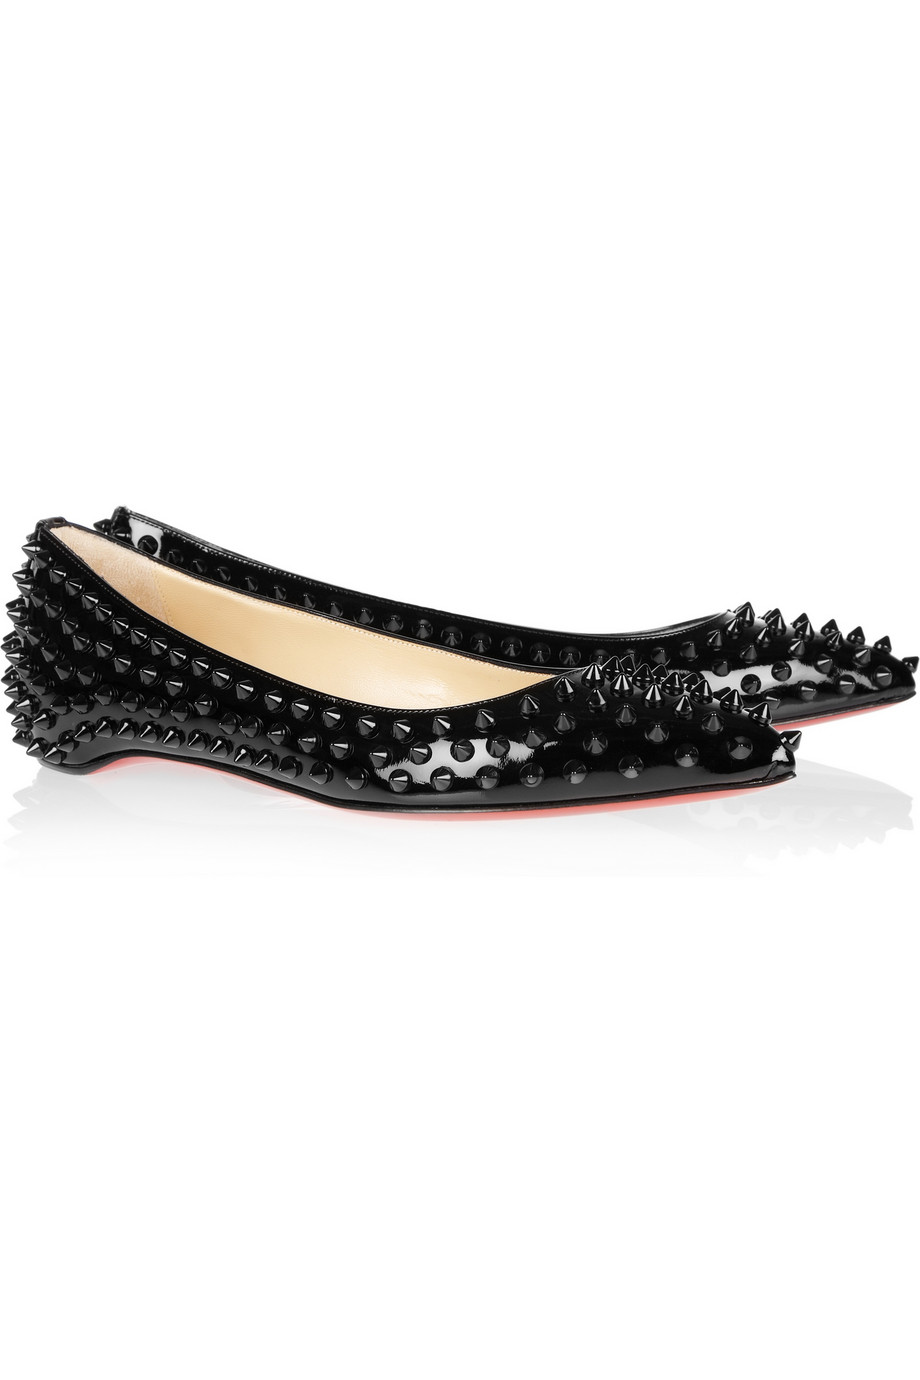 Christian Louboutin Pigalle Spikes Flat Black | Lyst